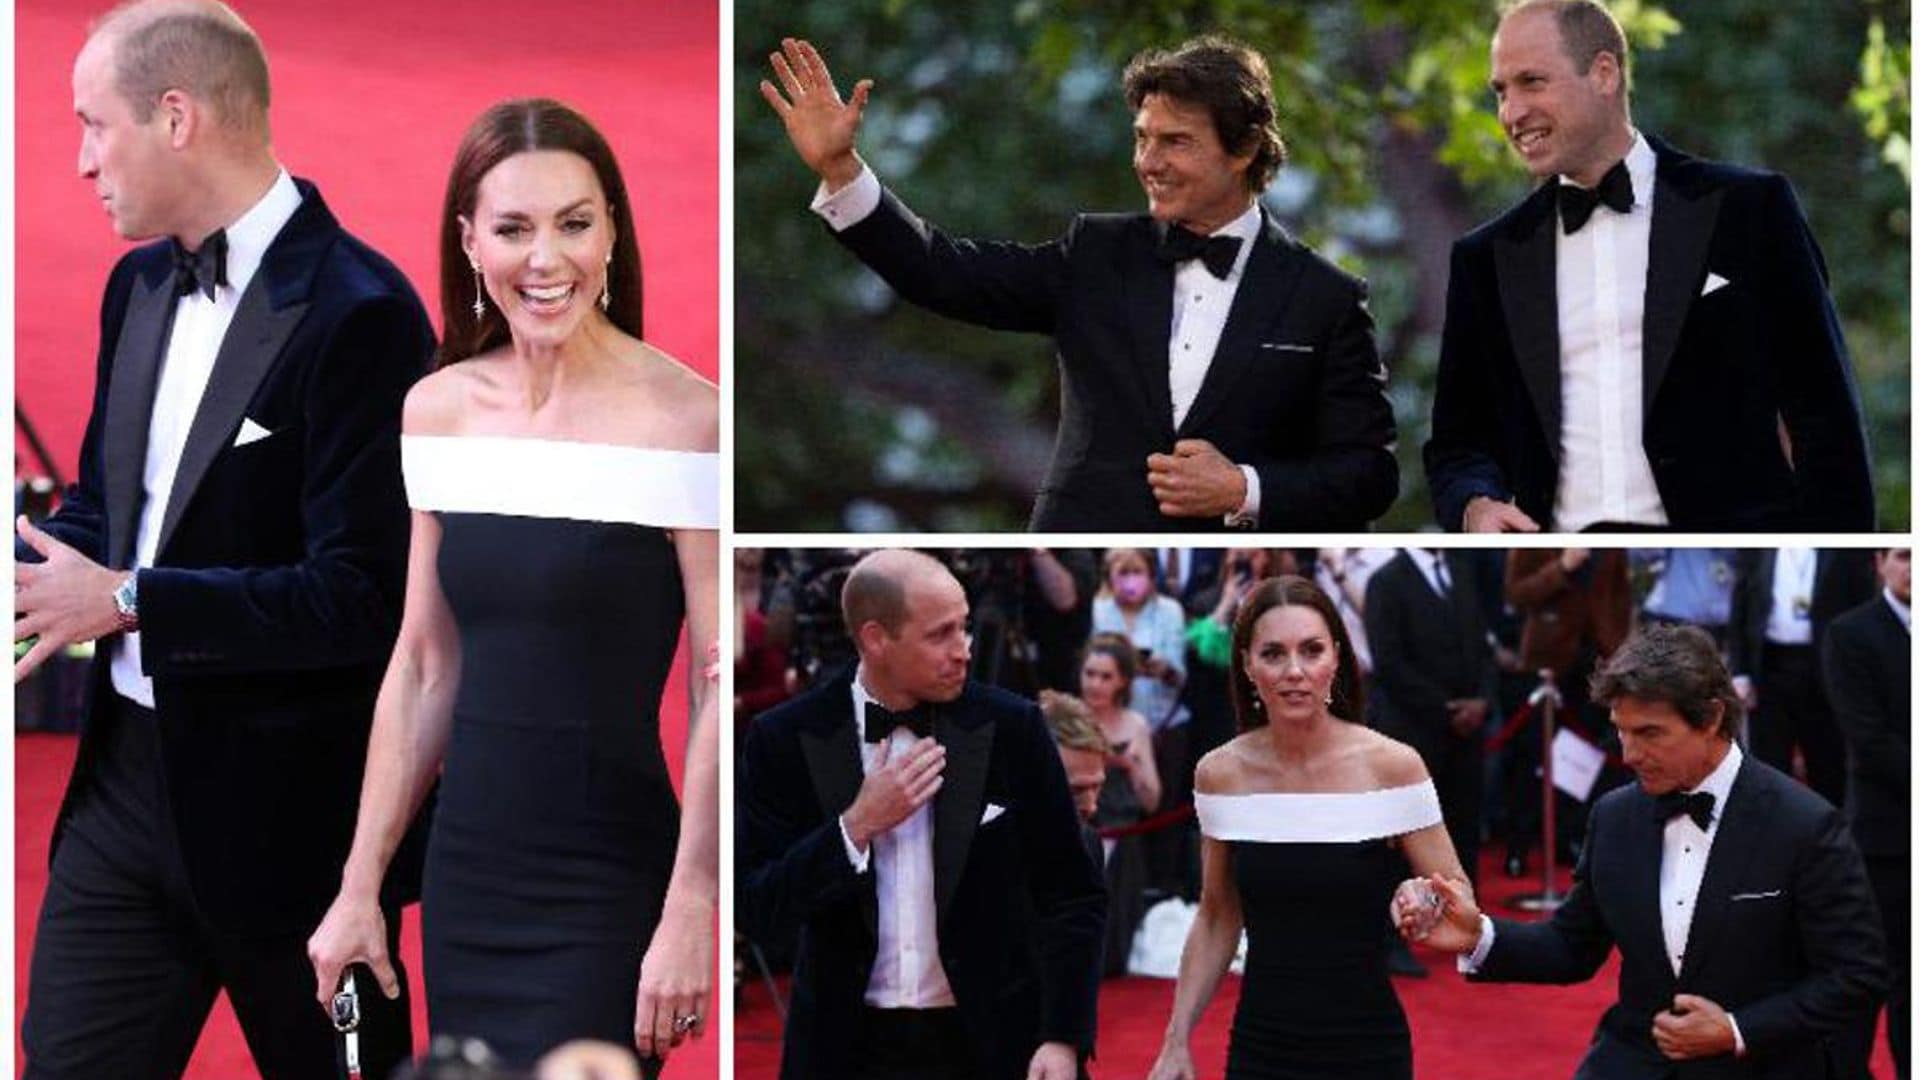 All the best photos from Prince William and Kate's red carpet appearance with Tom Cruise